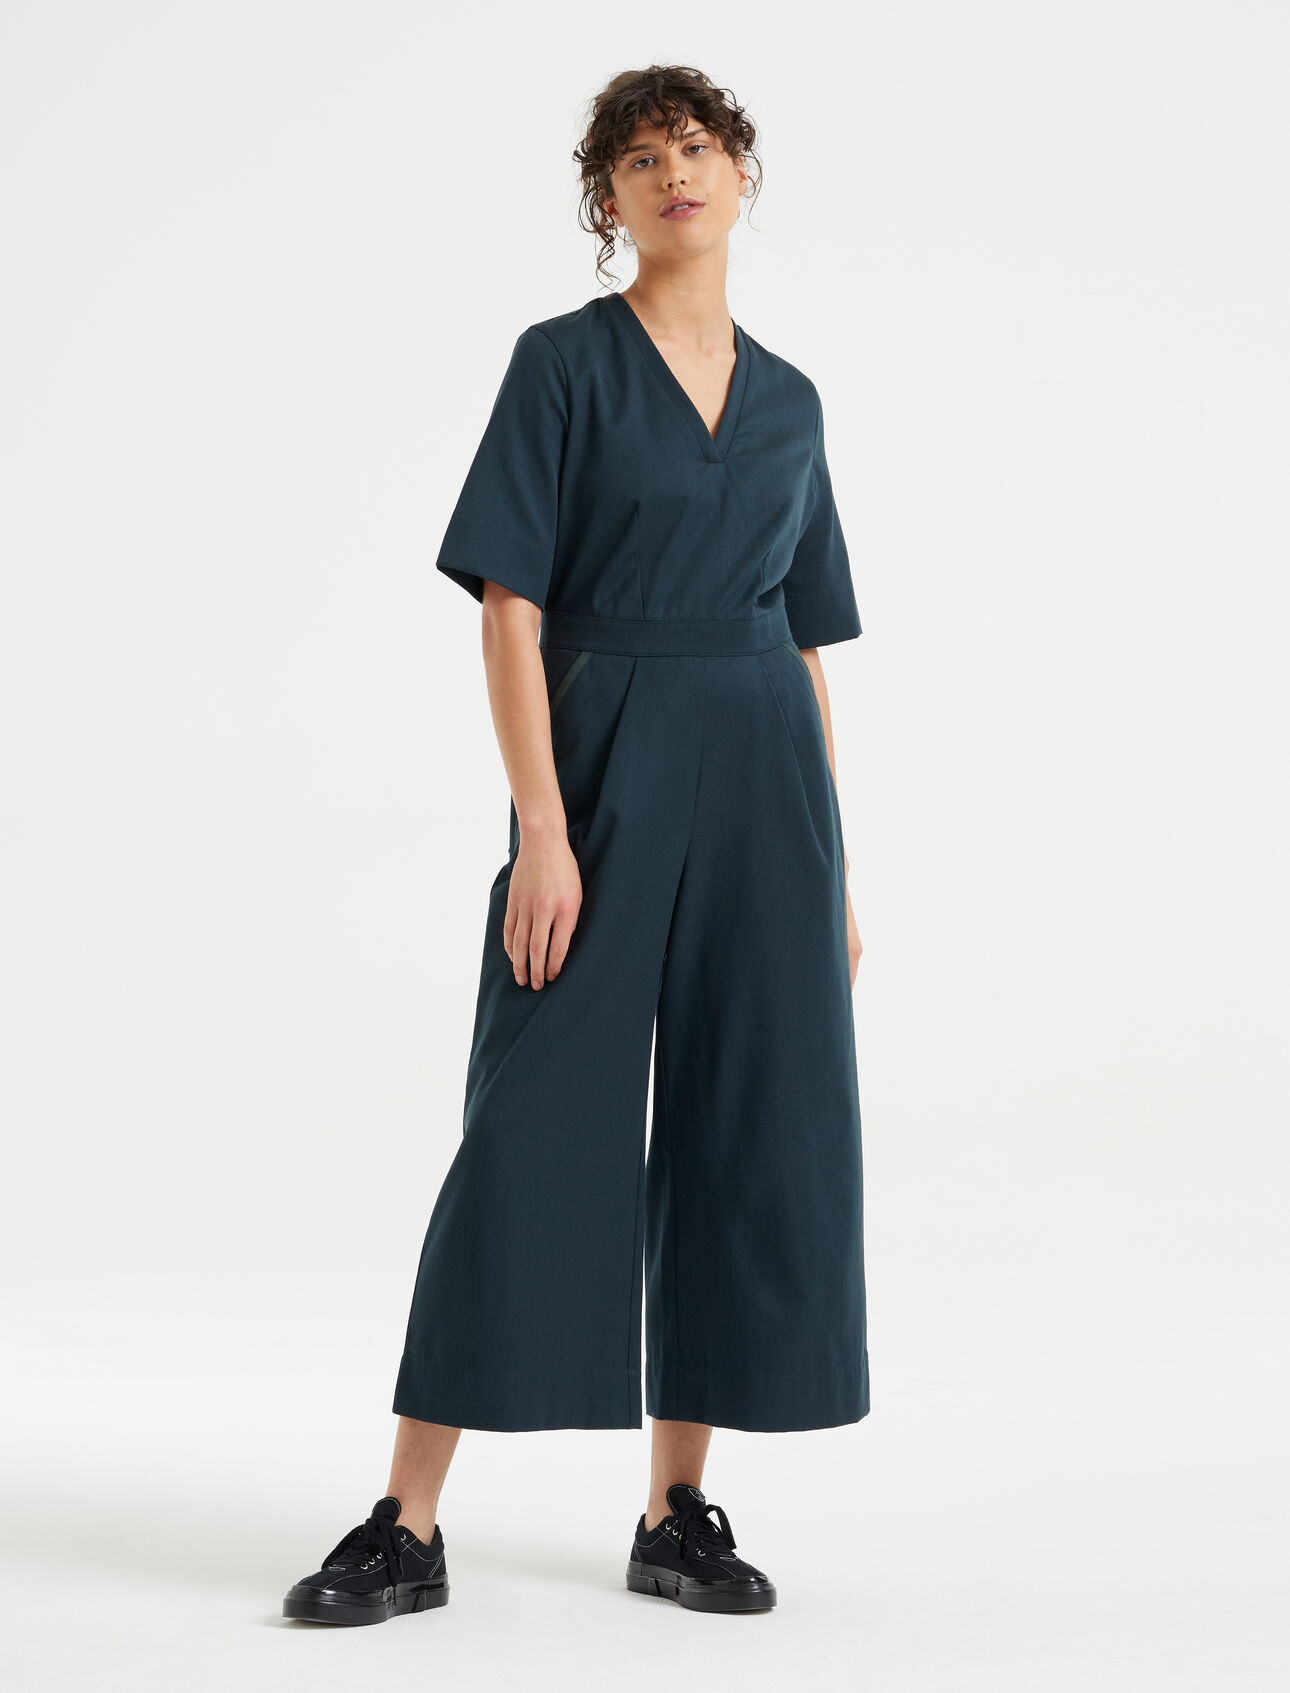 Womens Merino Natural Blend Jumpsuit A modern take on the classic jumpsuit, the Merino Natural Blend Short Sleeve Jumpsuit features a woven blend of merino wool and organic cotton, lined with Cool-Lite™ for breathable comfort and style.